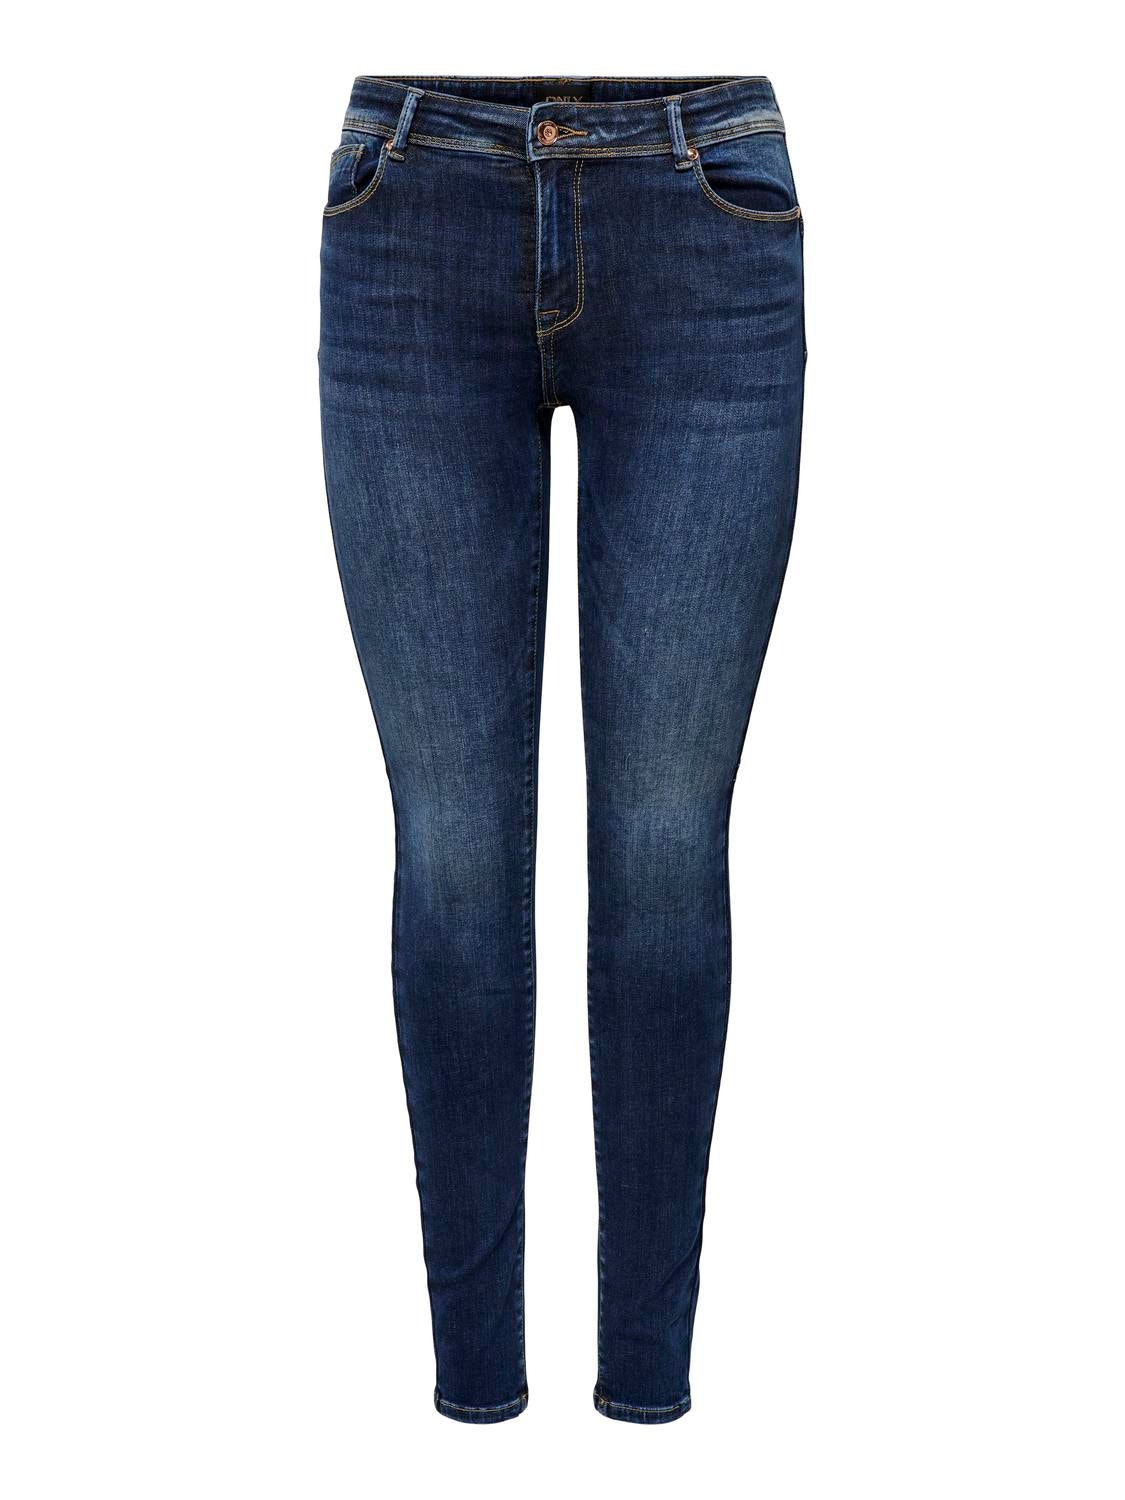 ONLY Jeans Skinny Fit Taille classique -Dark Blue Denim - 15235035